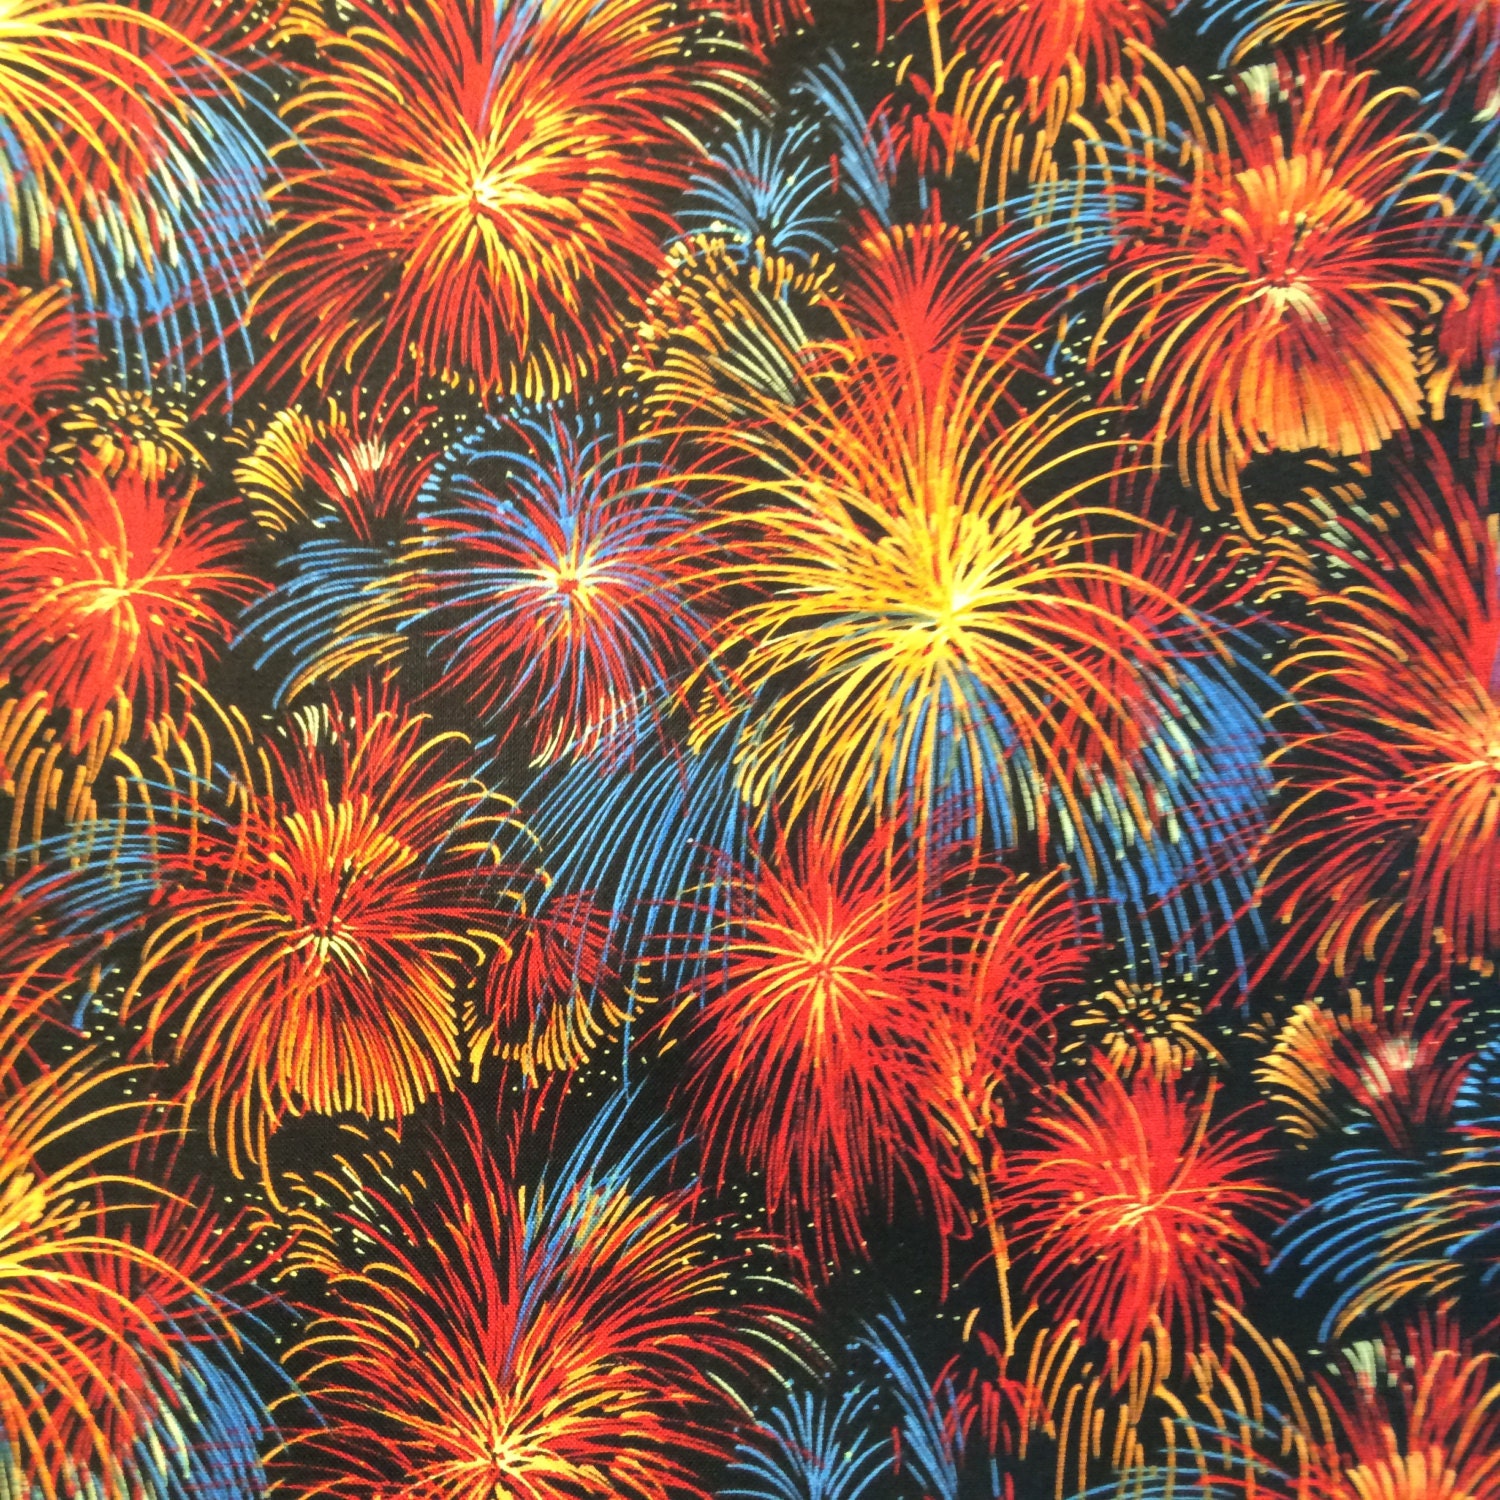 Fabric Fireworks Patriotic US Flag 4th of July 100% Cotton By